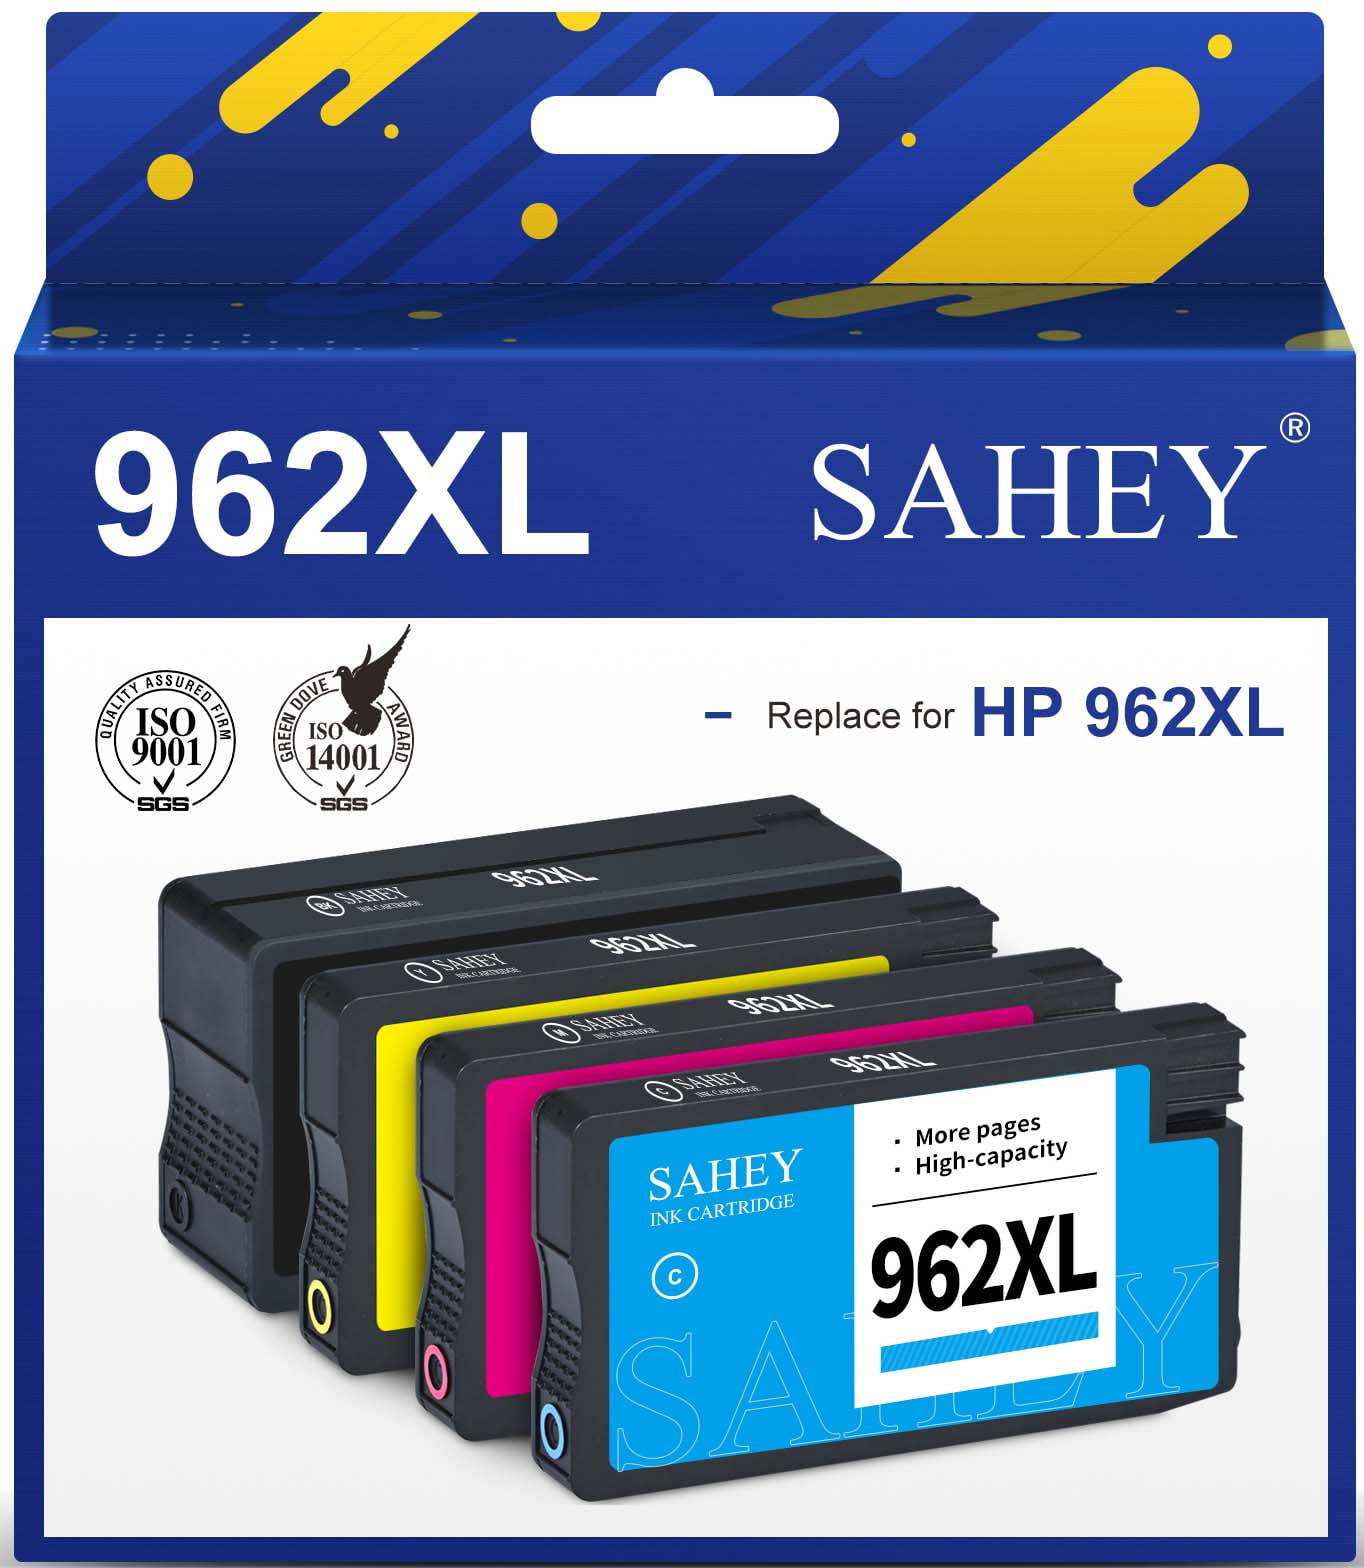 962XL Ink Cartridges for HP 962 Ink Cartridge with HP Officejet Pro 9010  9012 9015 9015 9018 9025 9020 9026 9028 (1 Black, 1 Cyan, 1 Magenta, 1